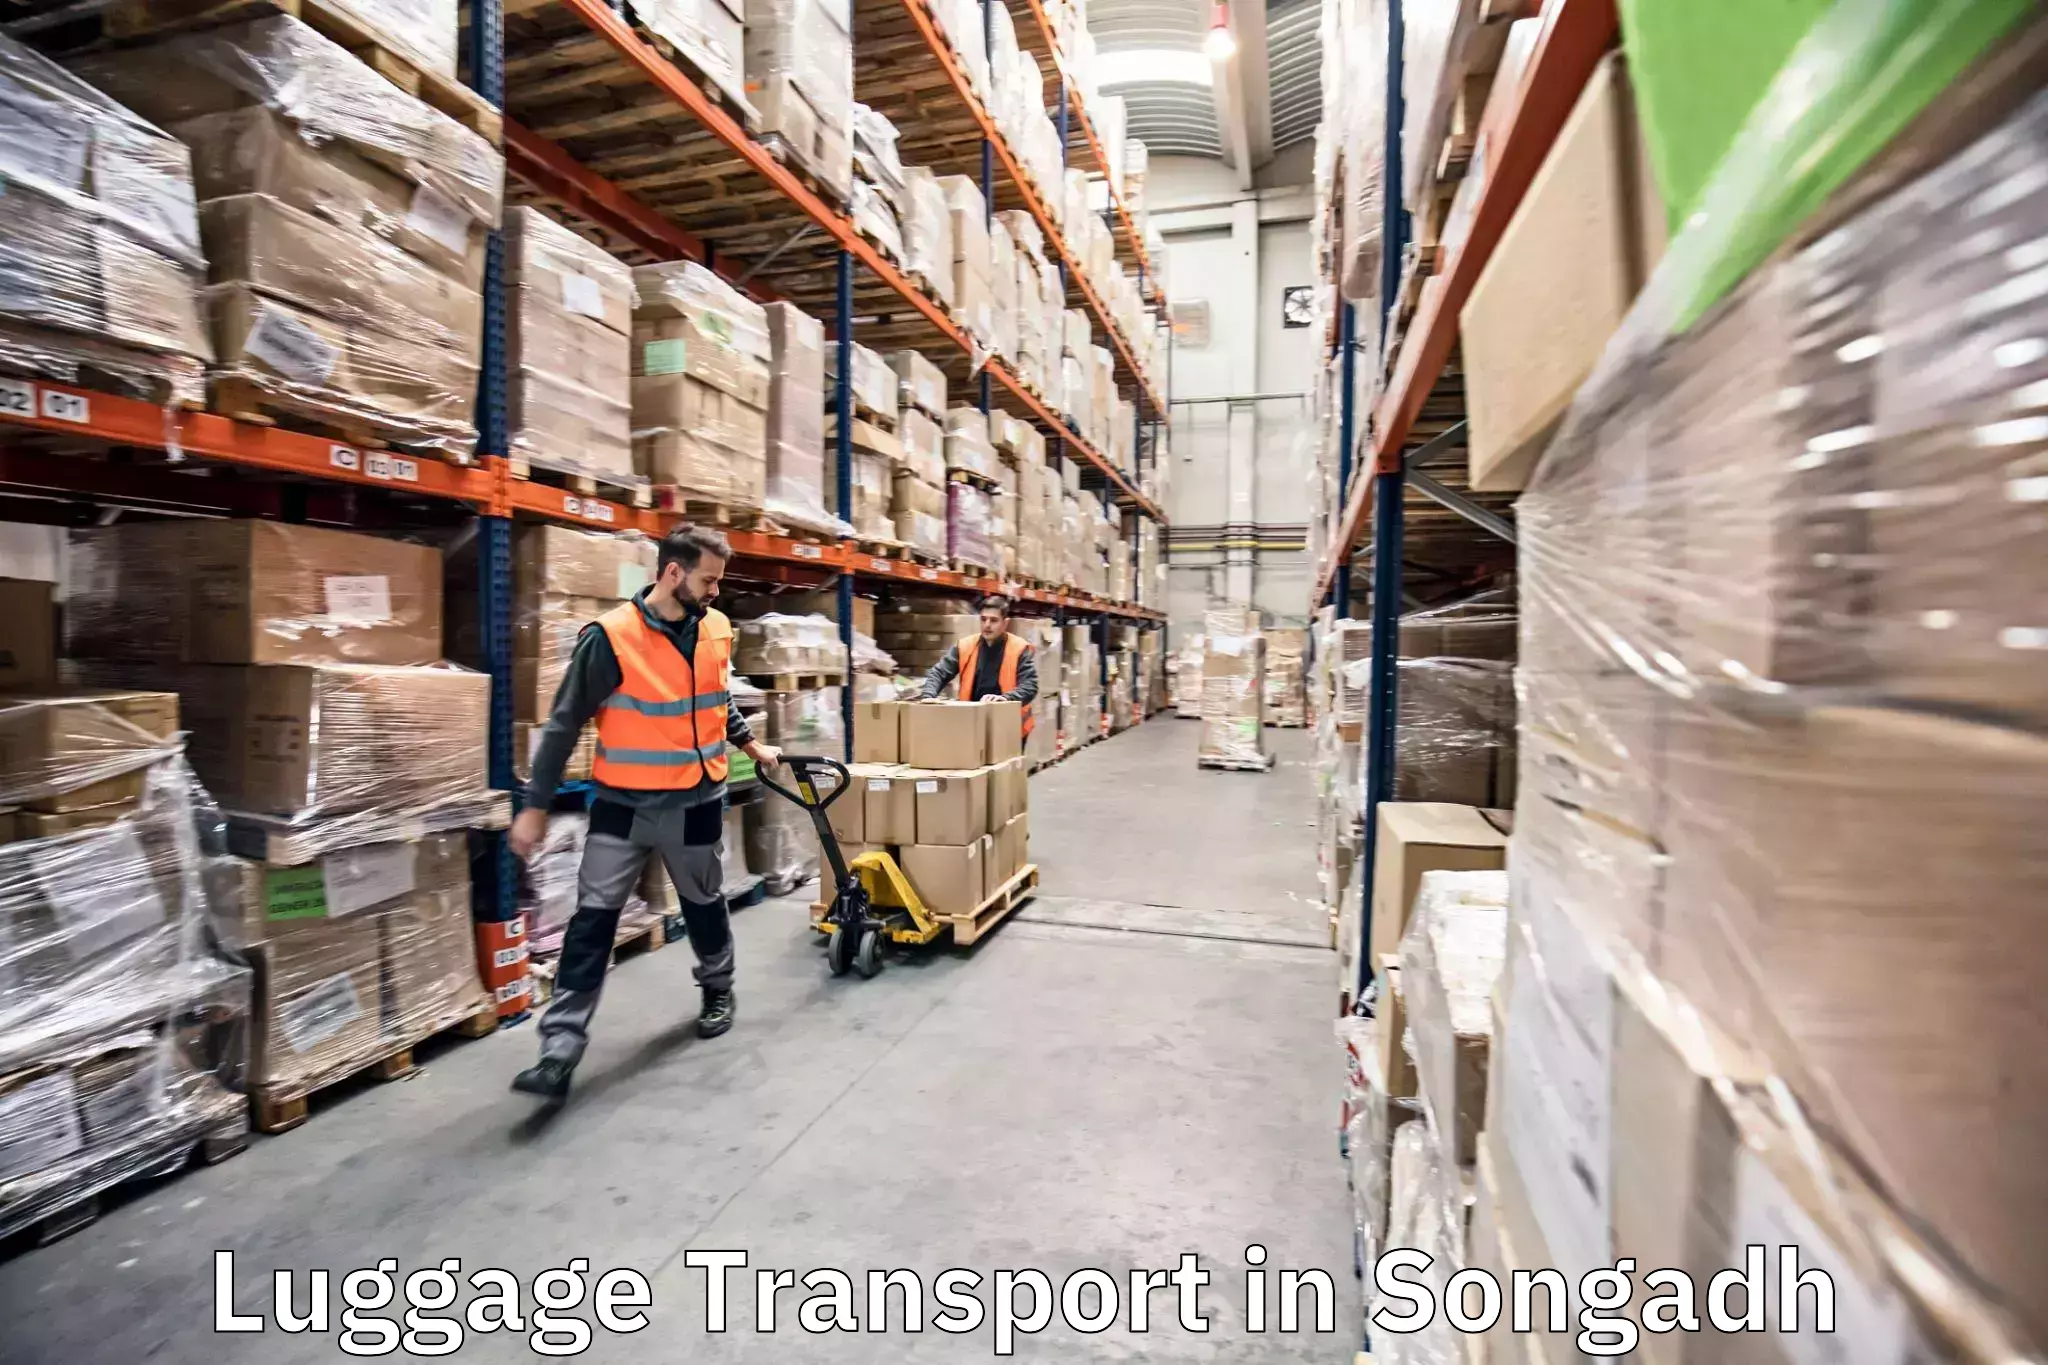 Luggage transport company in Songadh